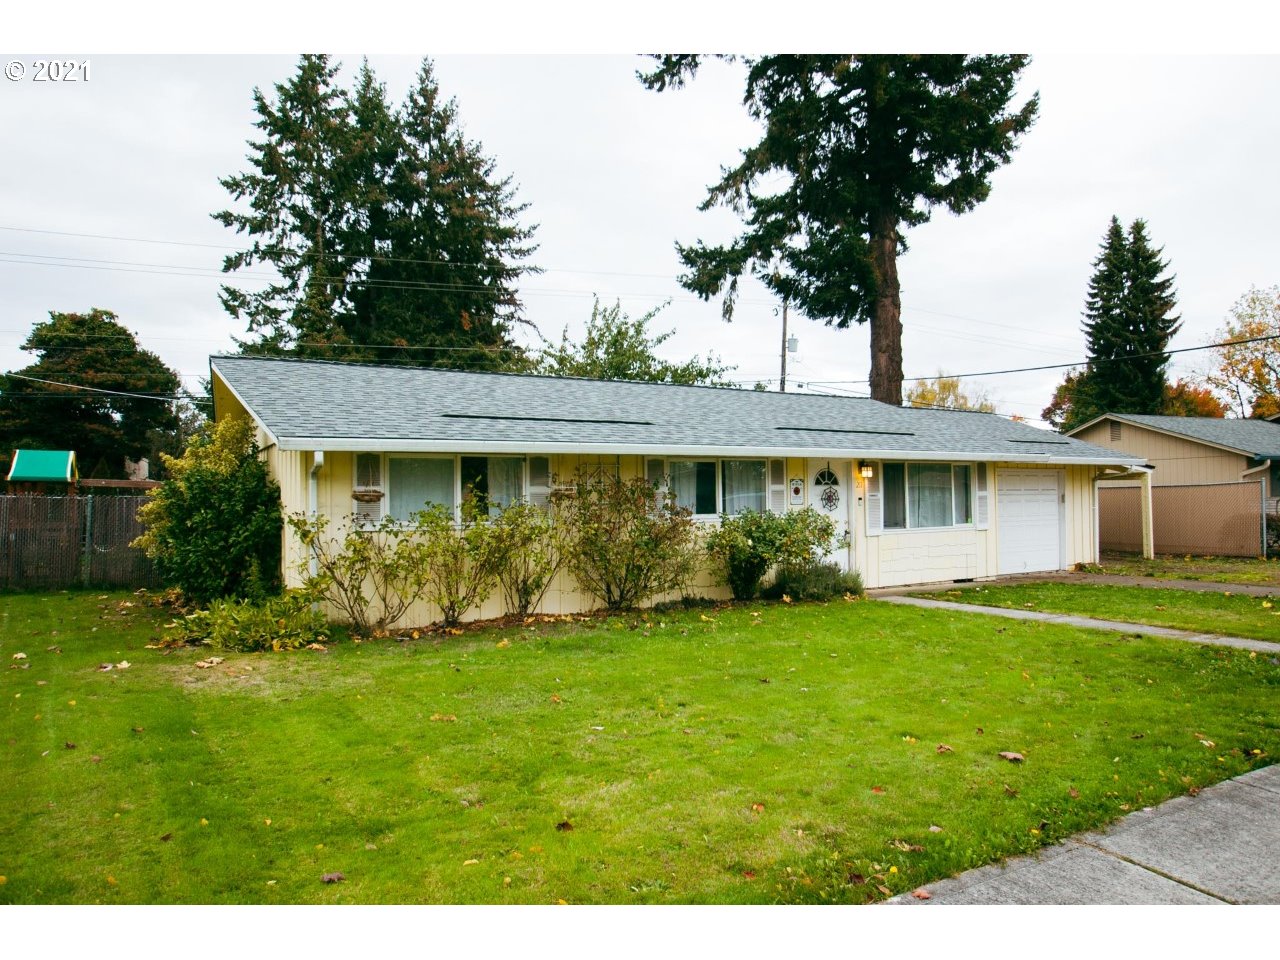 211 SE 98TH AVE (1 of 20)